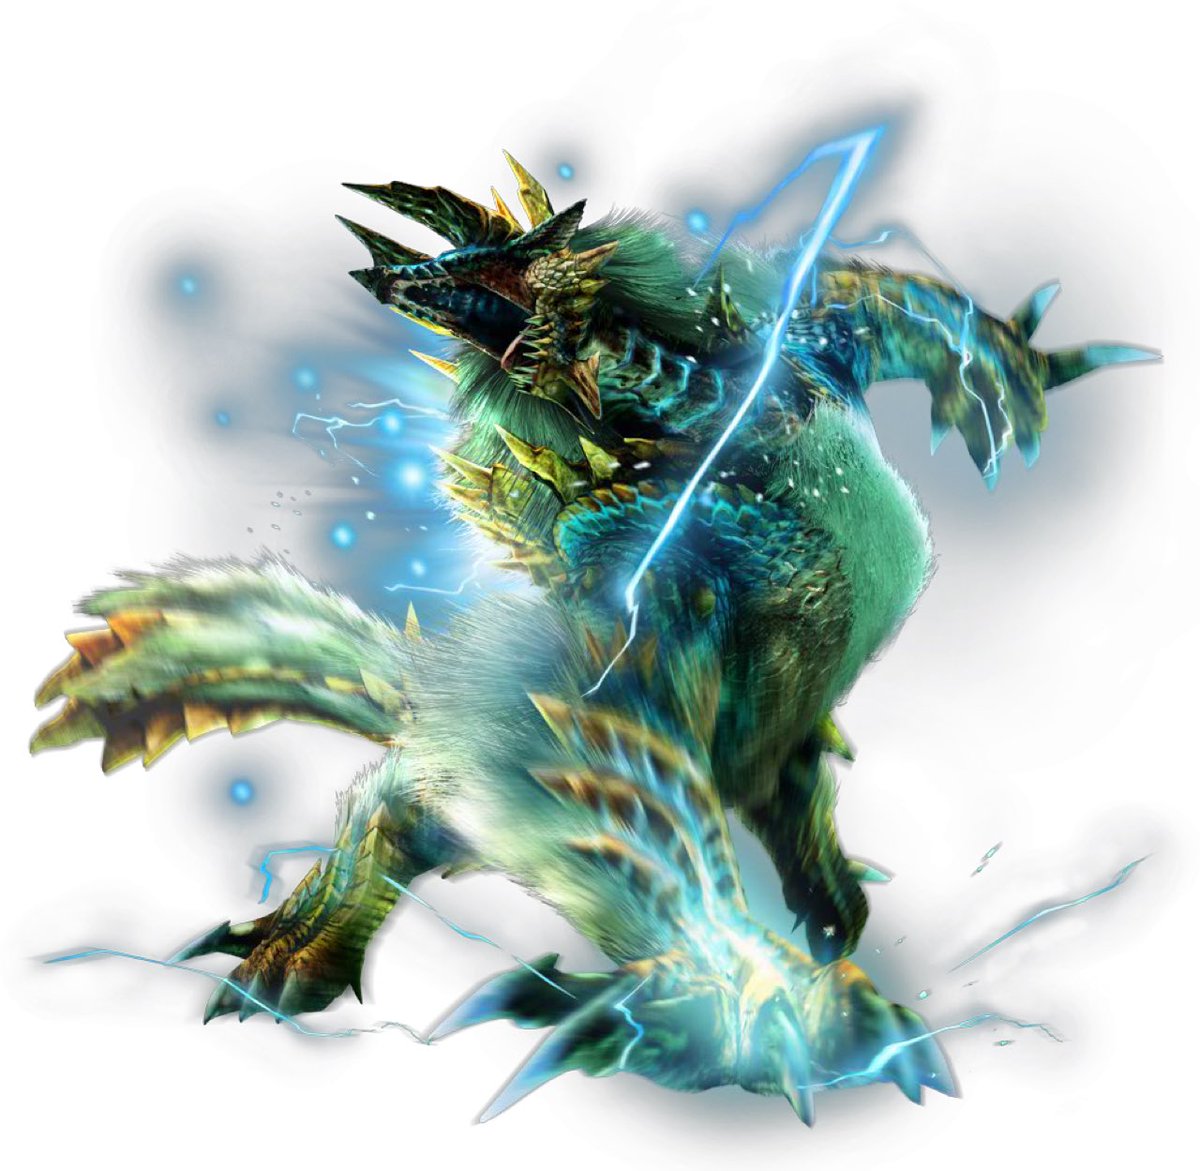 The most intimidating intro cutscene for Zinogre came from 4U.It begins with a scene of his long deadly claws and a flash of lightning before Zinogre heads to the area you start at.